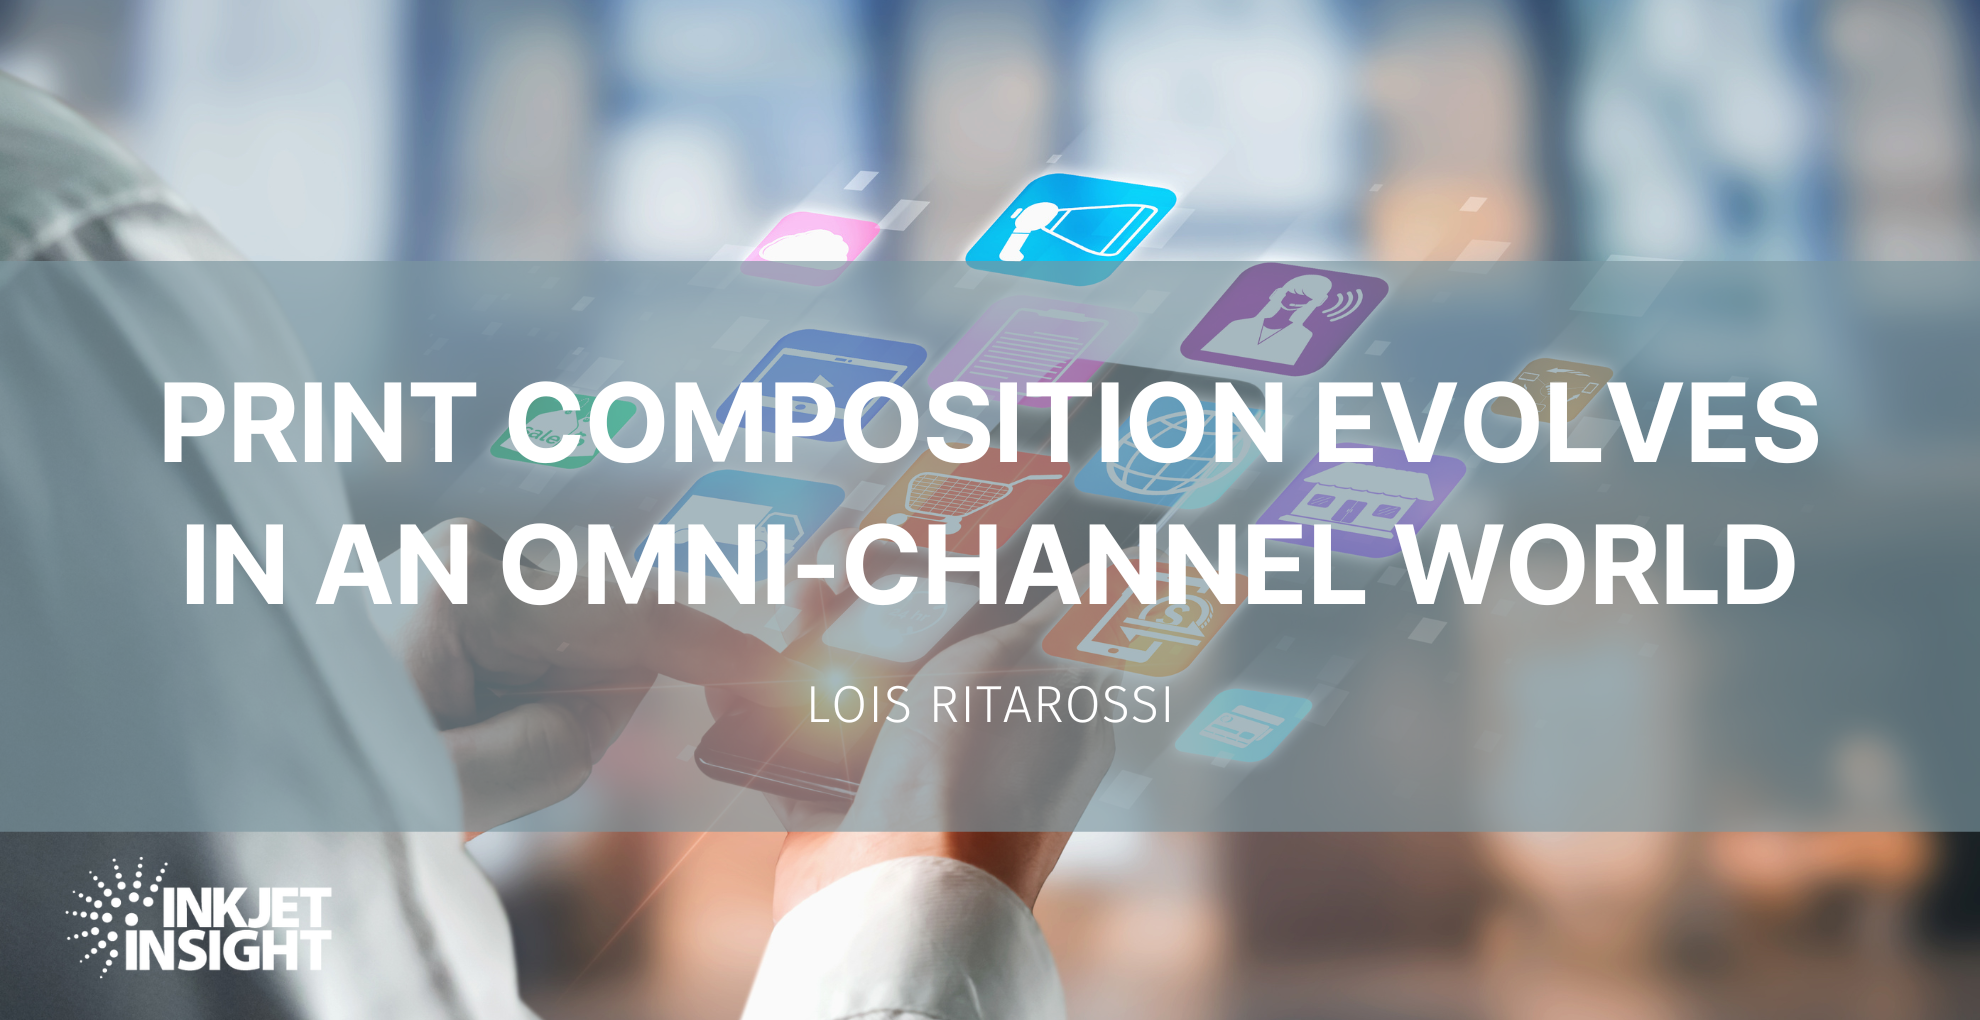 Featured image for “Print composition evolves in an omni-channel world”